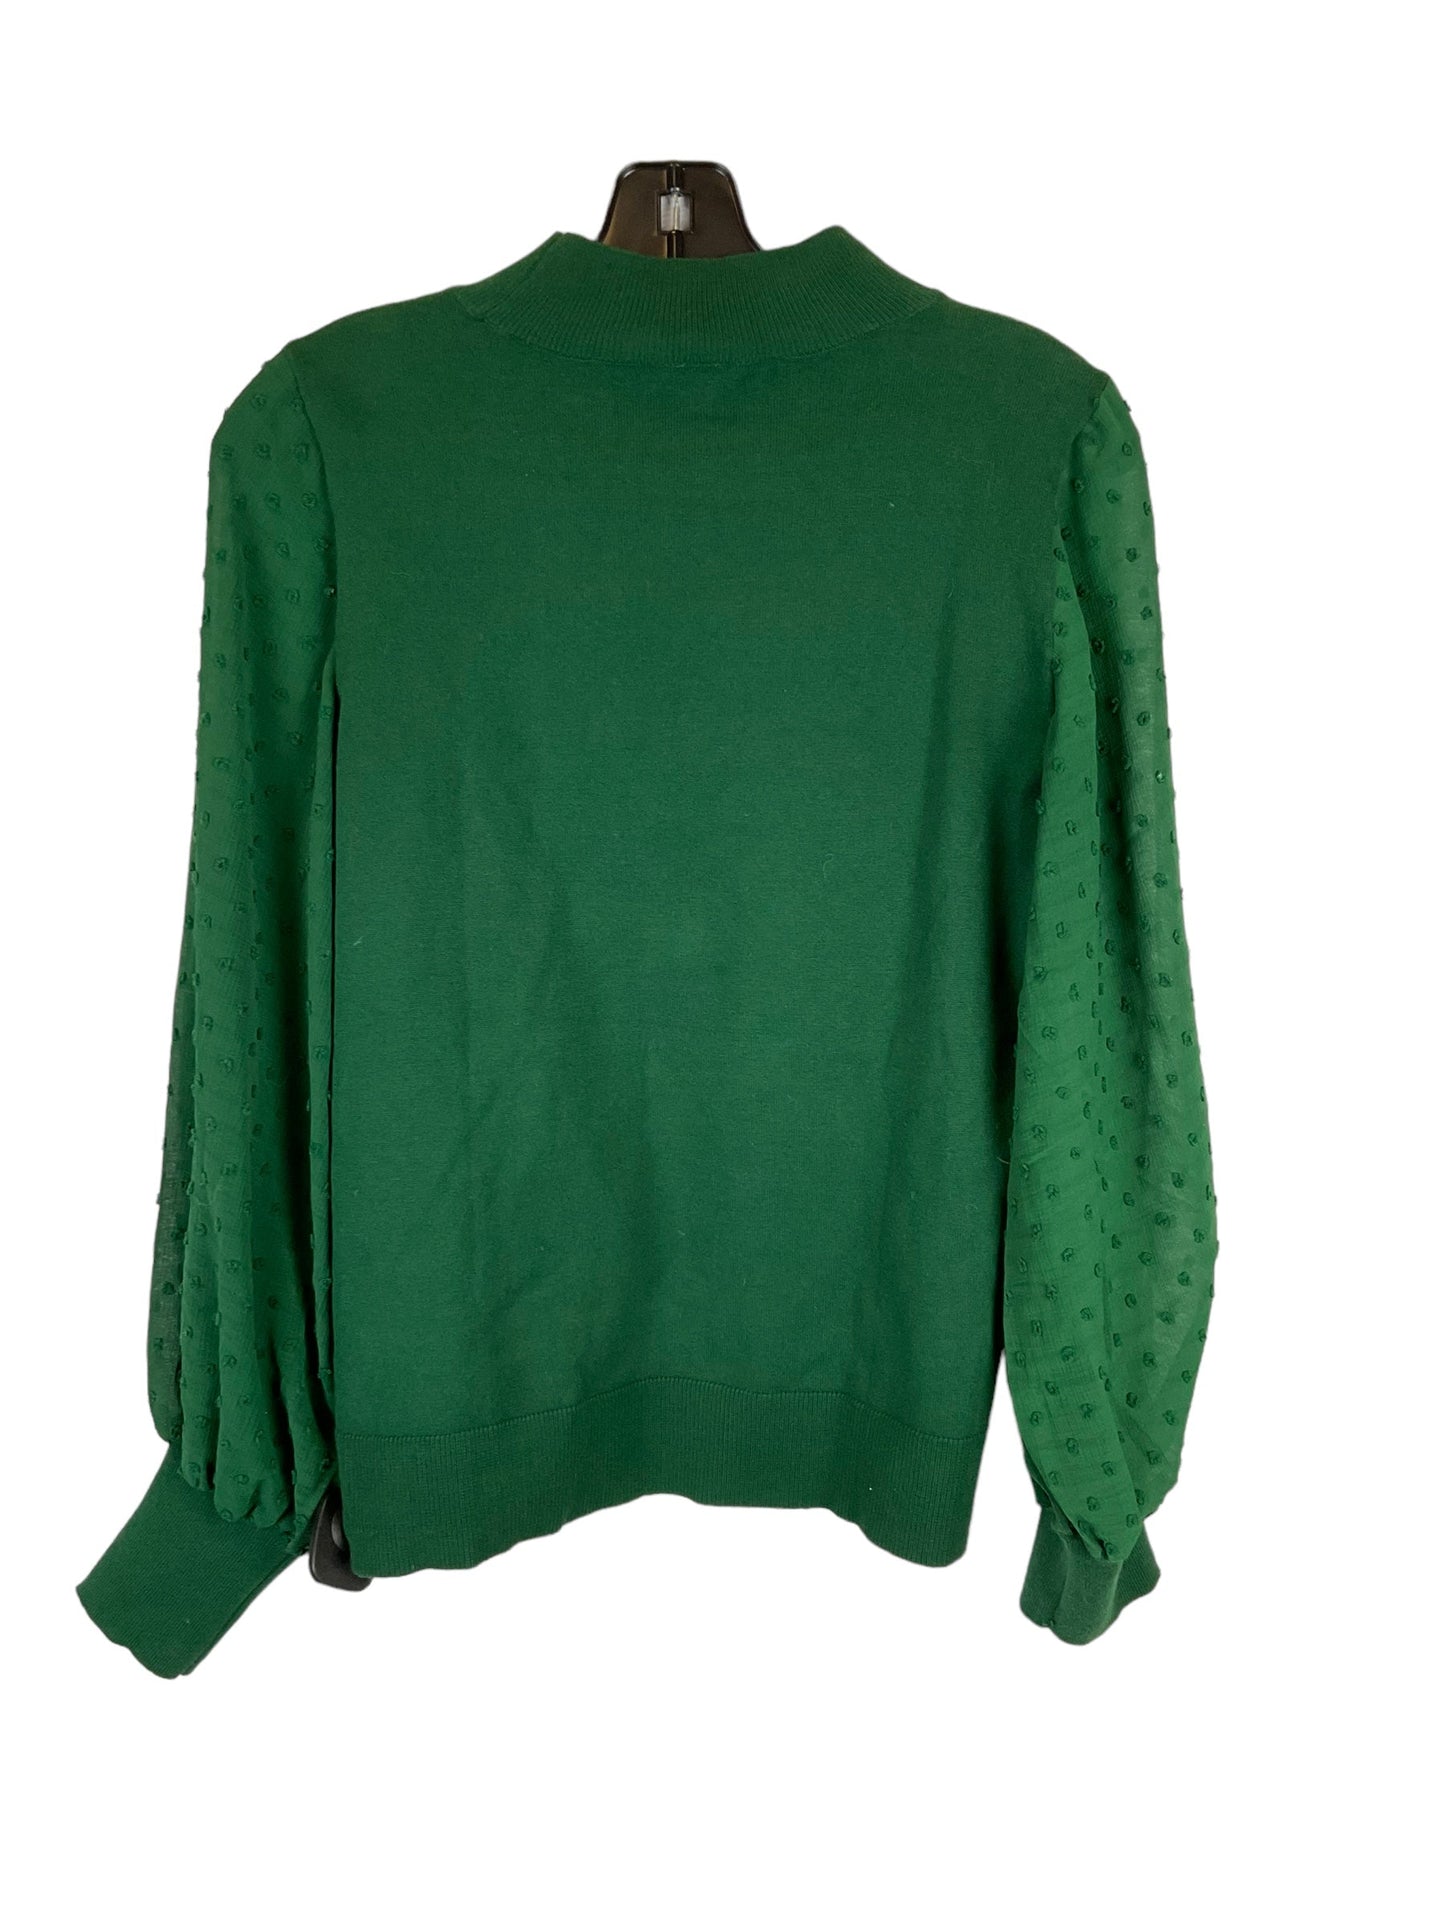 Top Long Sleeve By Vince Camuto  Size: S